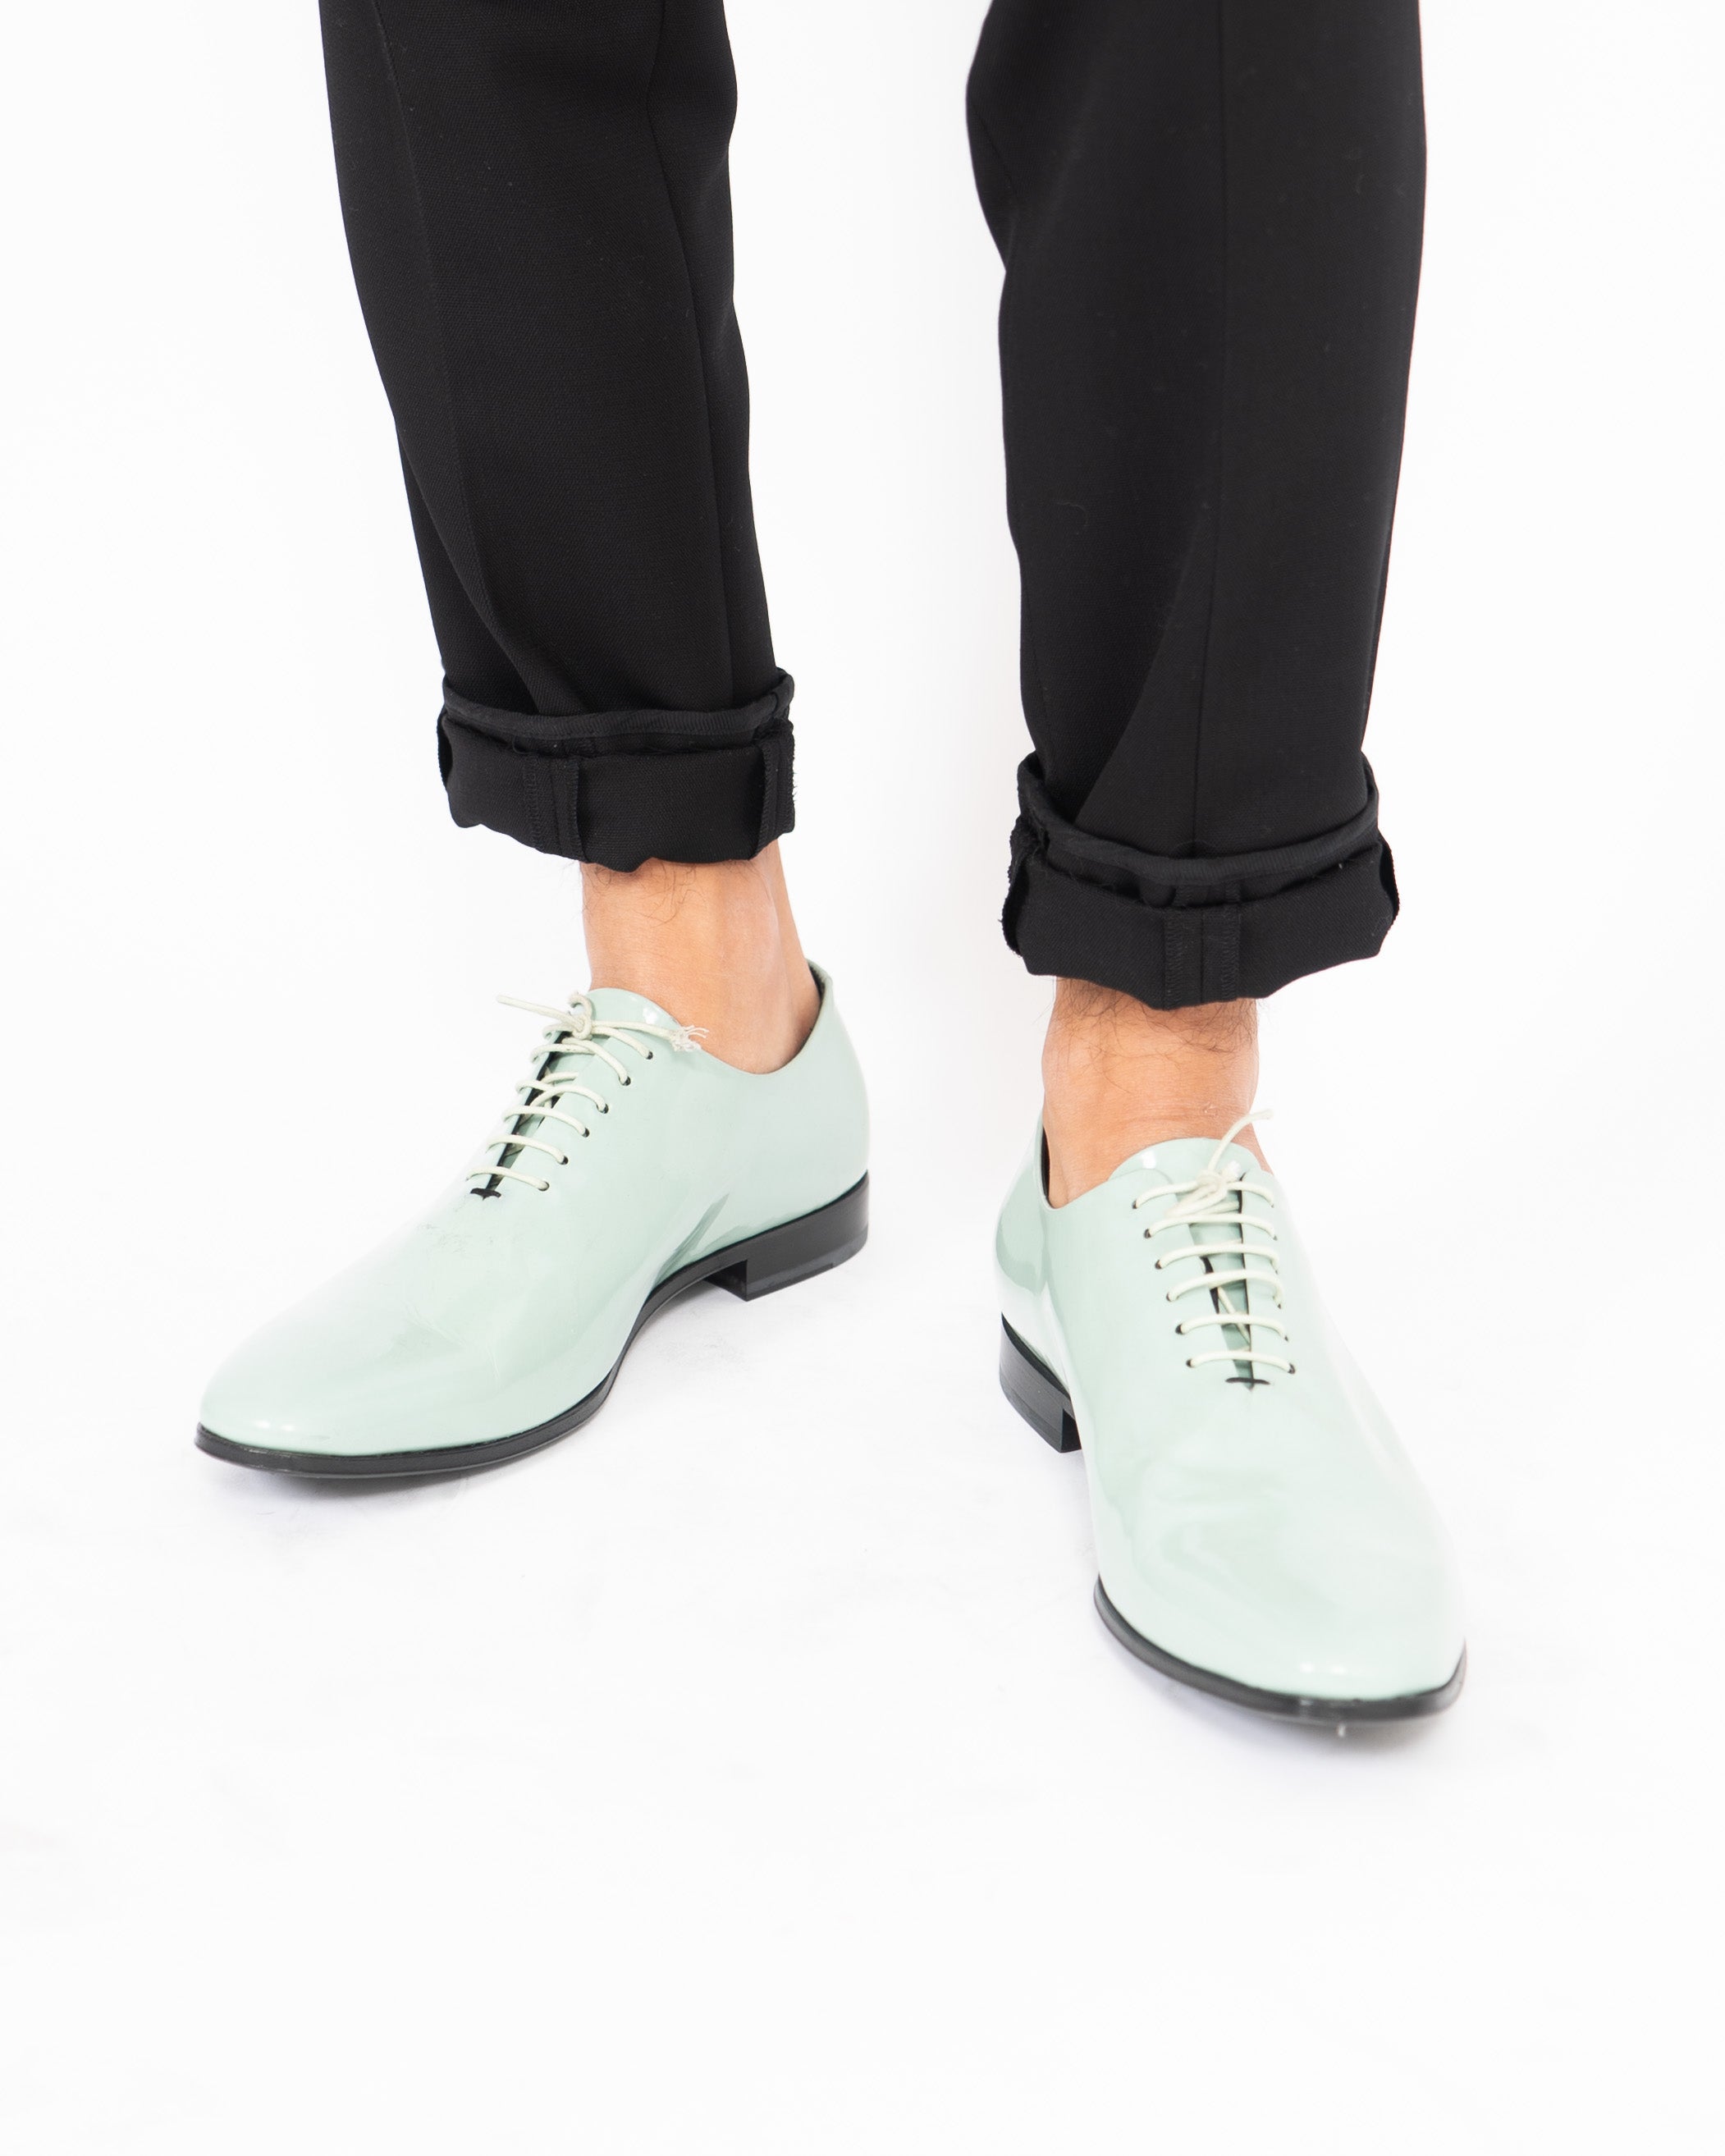 FW19 Mint Green Patent Leather Derbies